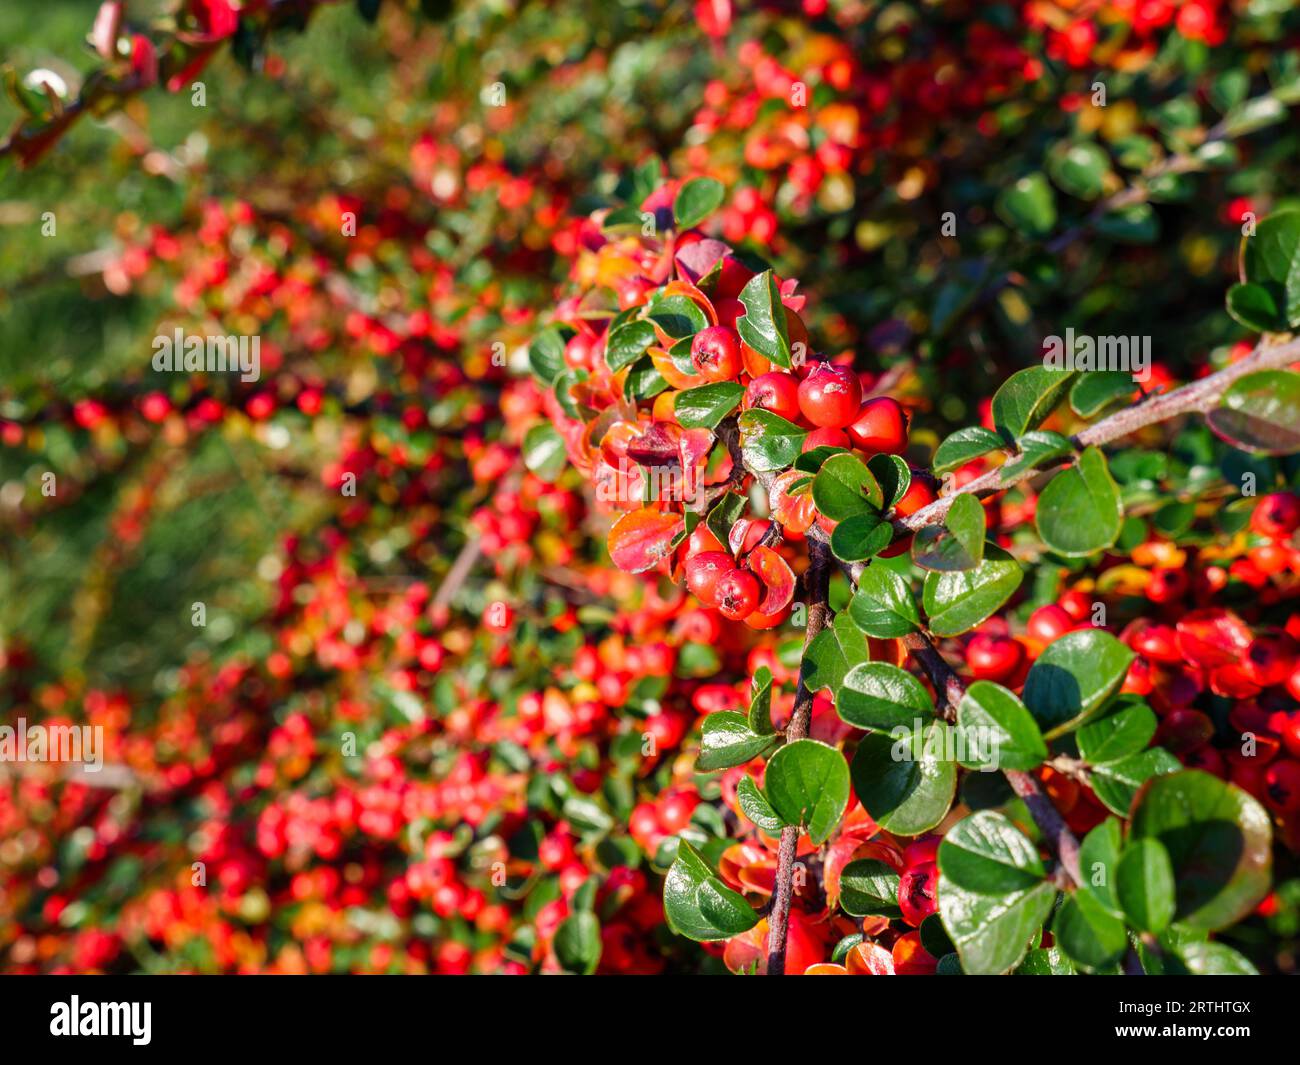 Closeup of many beautiful cotoneaster red and orange berries and tiny green glossy leaves on curvy tilted branches of a bush in a park on a sunny day. Stock Photo